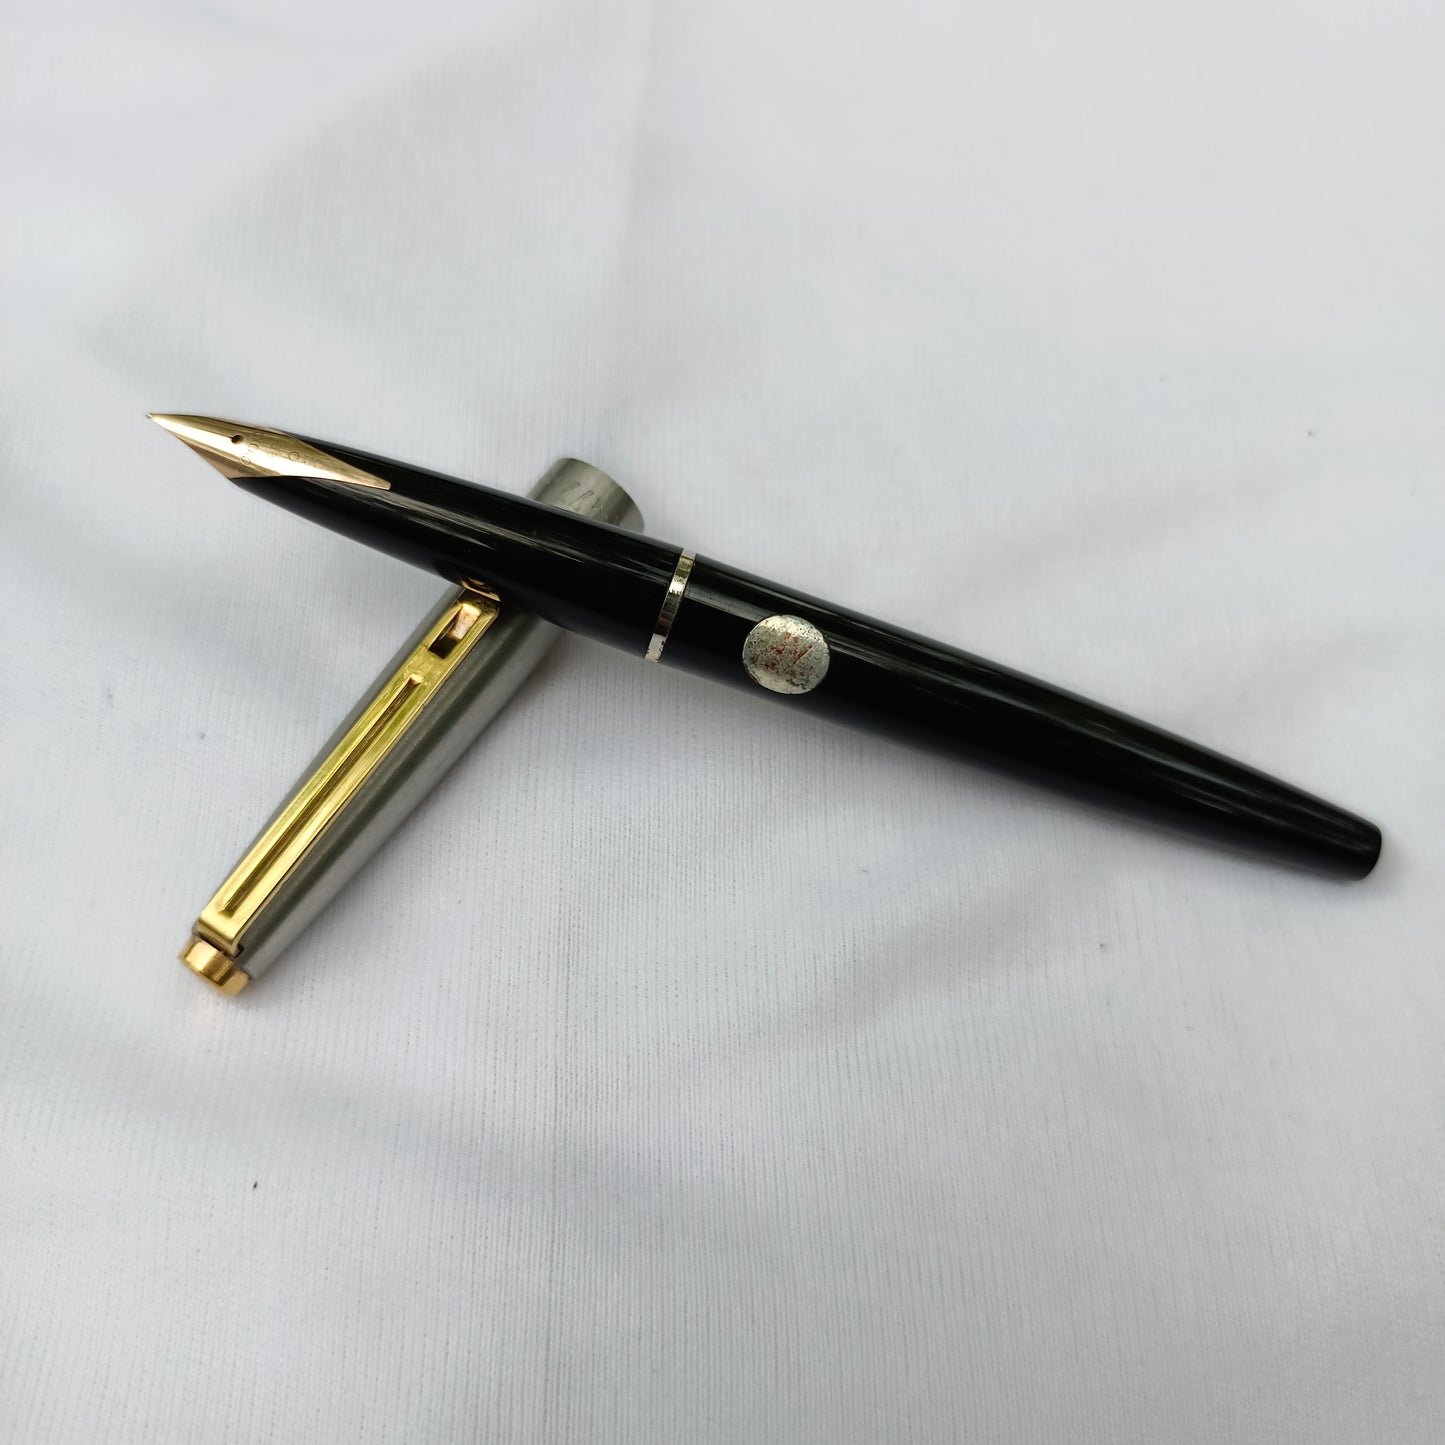 Inoxcrom 77 Fountain Pen Made in Spain